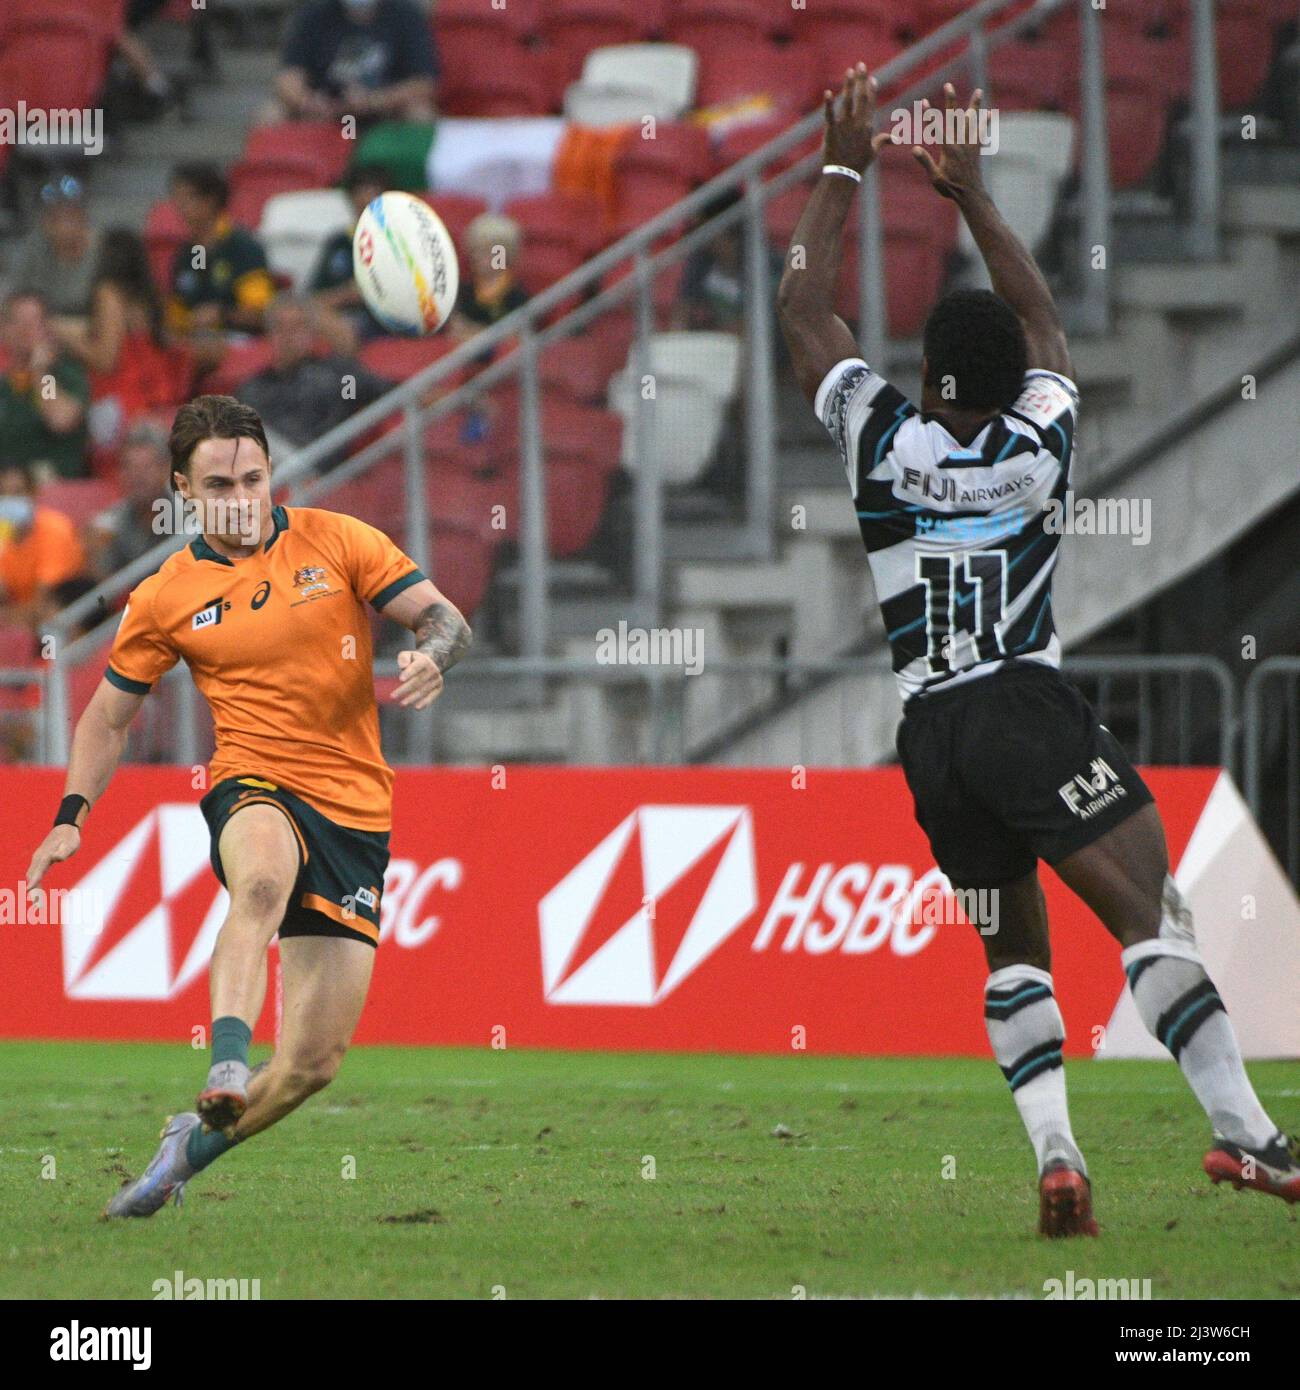 Singapore. 10th Apr, 2022. Corey Toole (L) of Australia competes during the semifinal between Australia and Fiji at the HSBC World Rugby Sevens Singapore stop, held in the National Stadium on April 10, 2022. Credit: Then Chih Wey/Xinhua/Alamy Live News Stock Photo